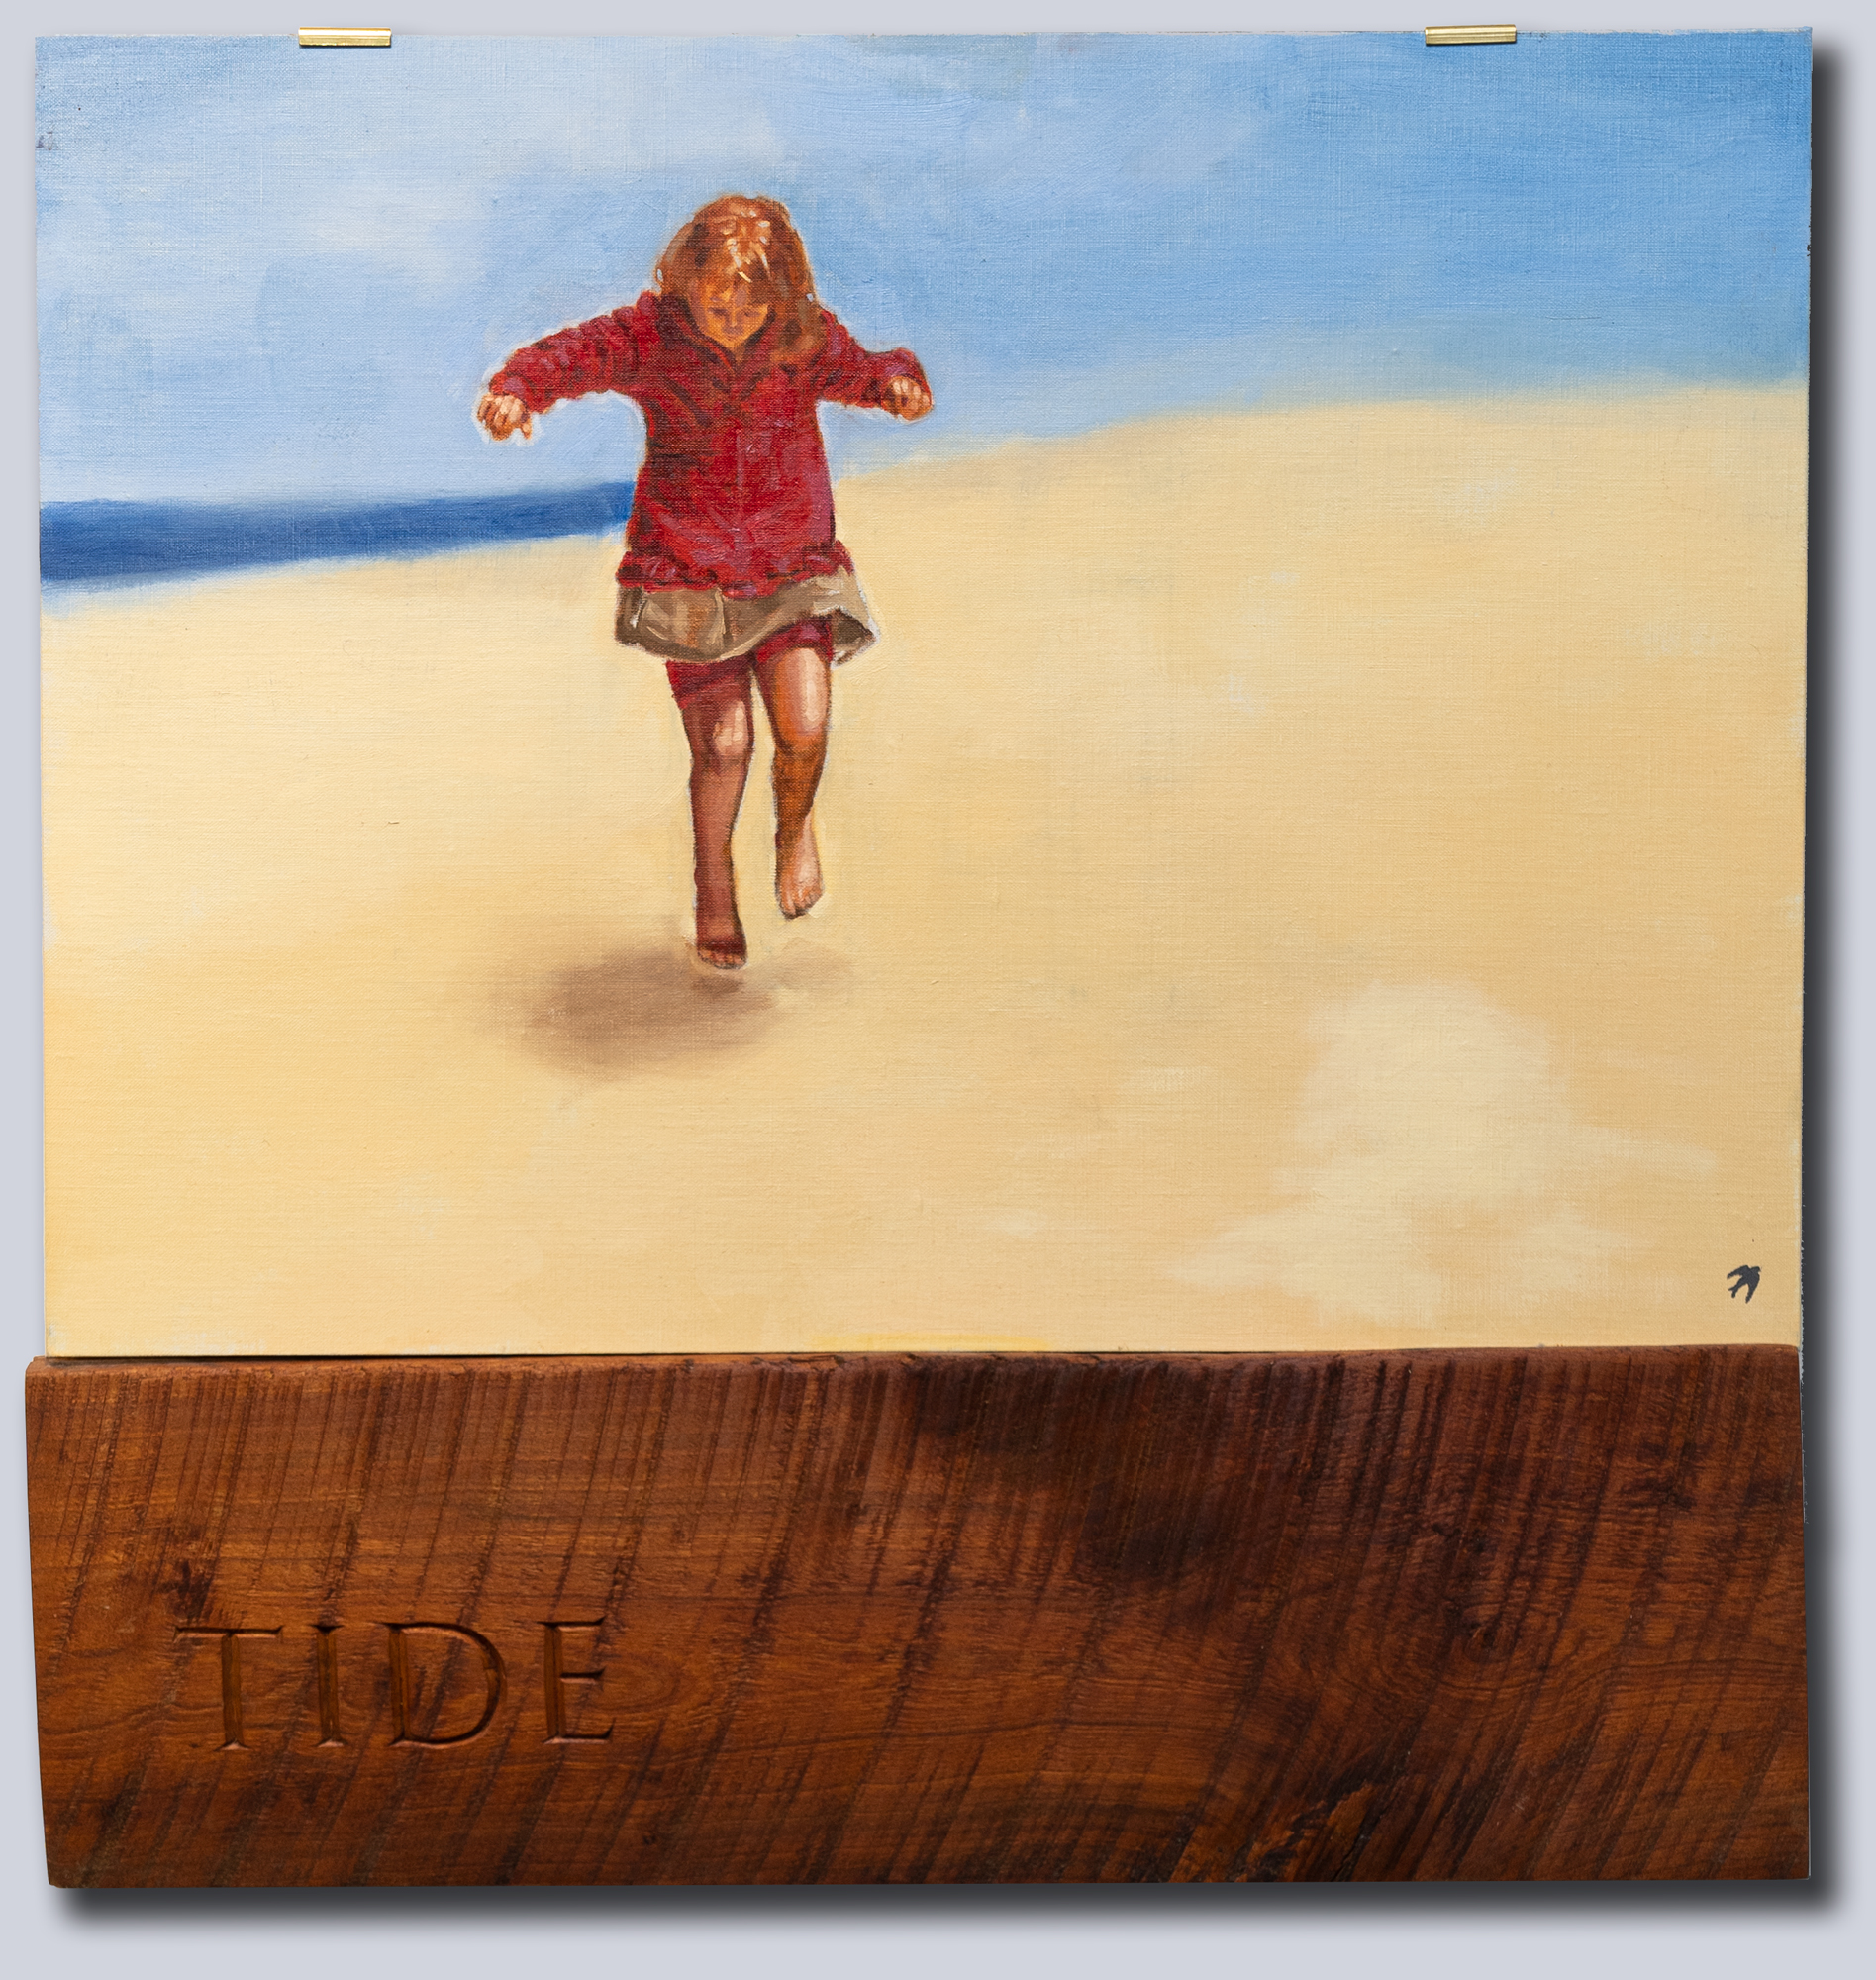 A painting of a young child dances on a beach with blue sky behind. Below is a length of wood with Tide carved into it.